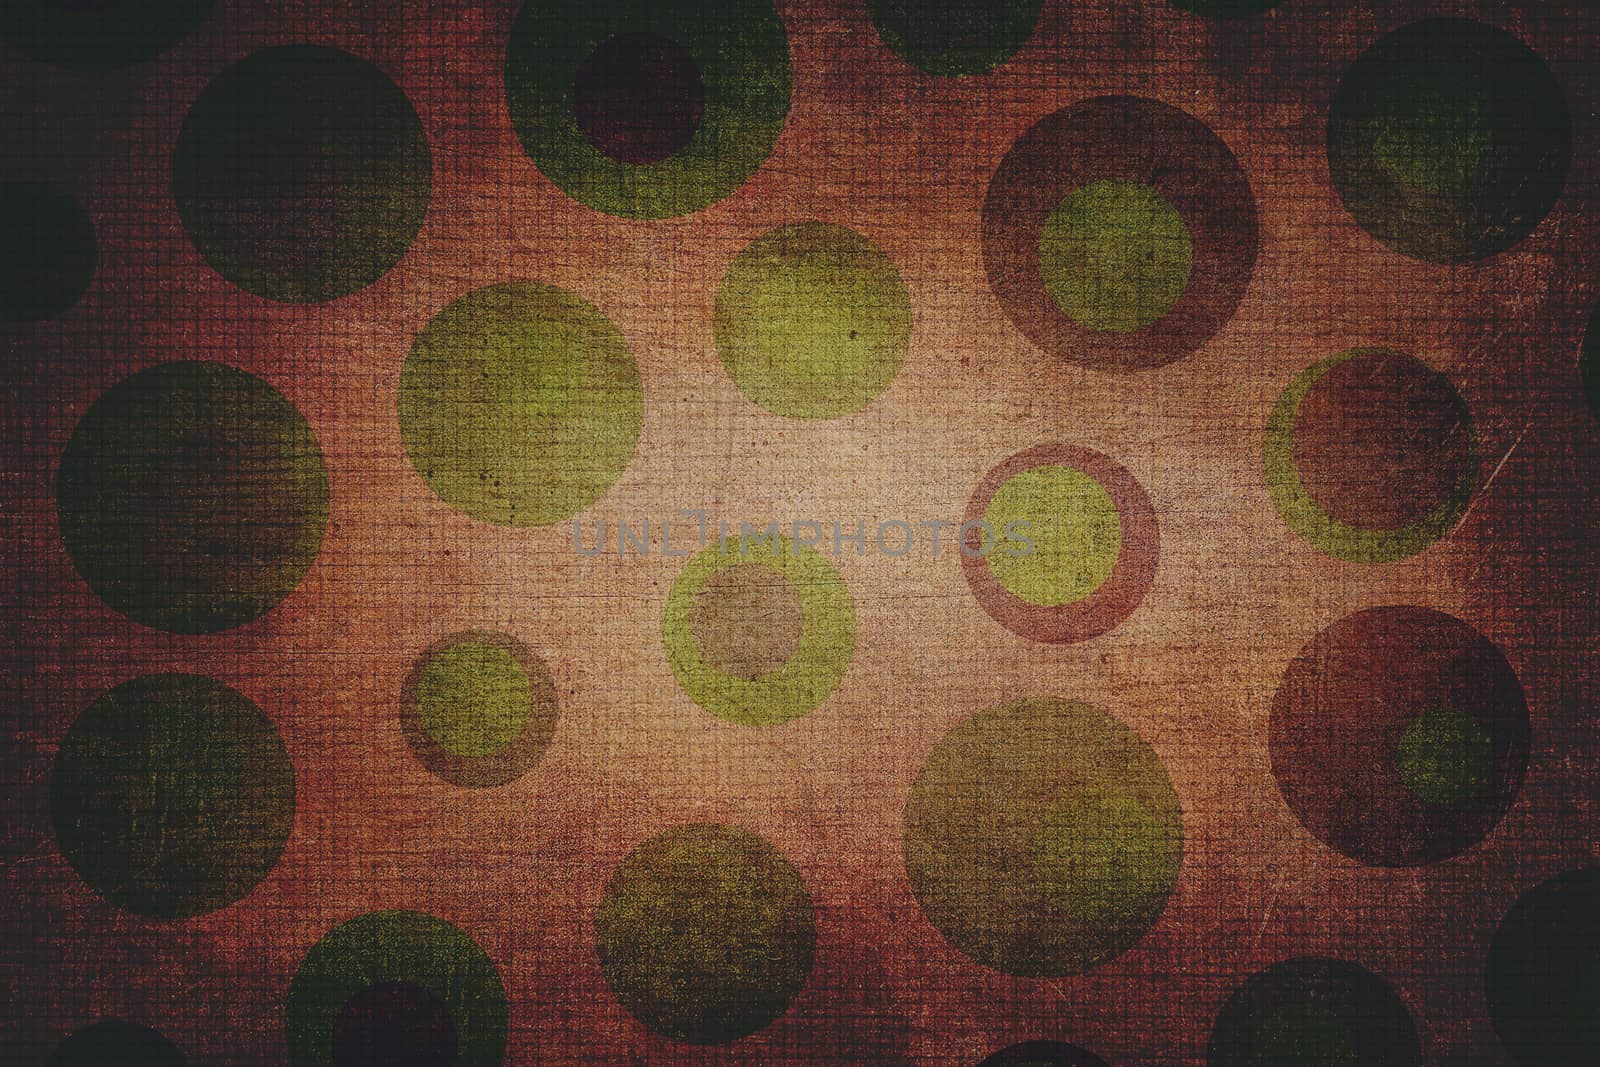 Dark Green and Brown Dots Texture with Squares by MaxalTamor